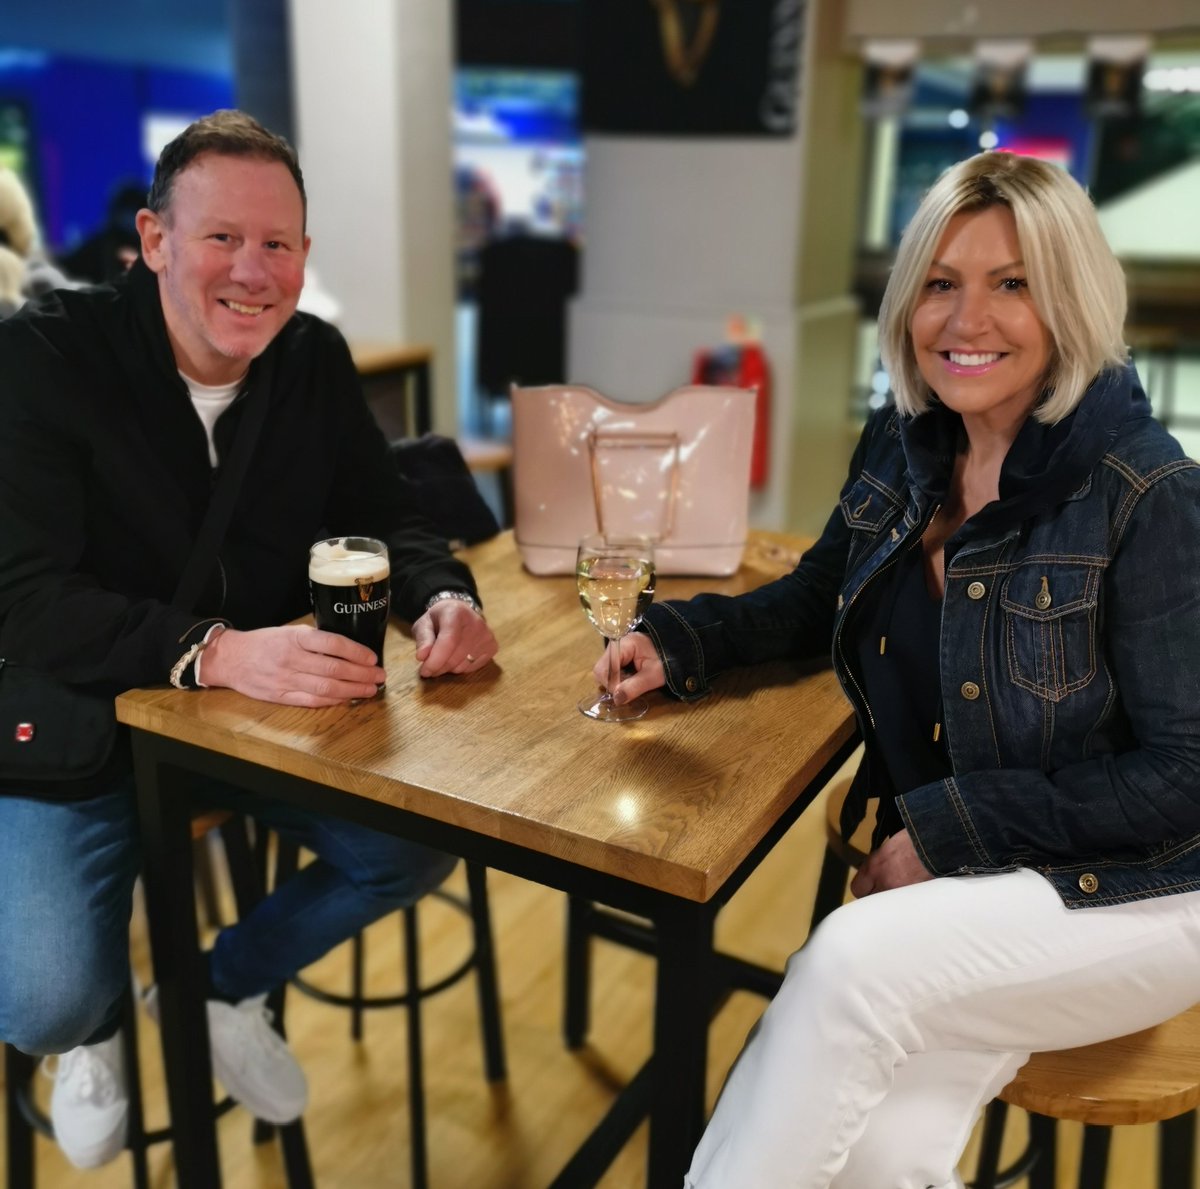 Airport beers. Little treat for my wife. Hate to break it to her we've only come to watch the planes taking off 🤫✈️